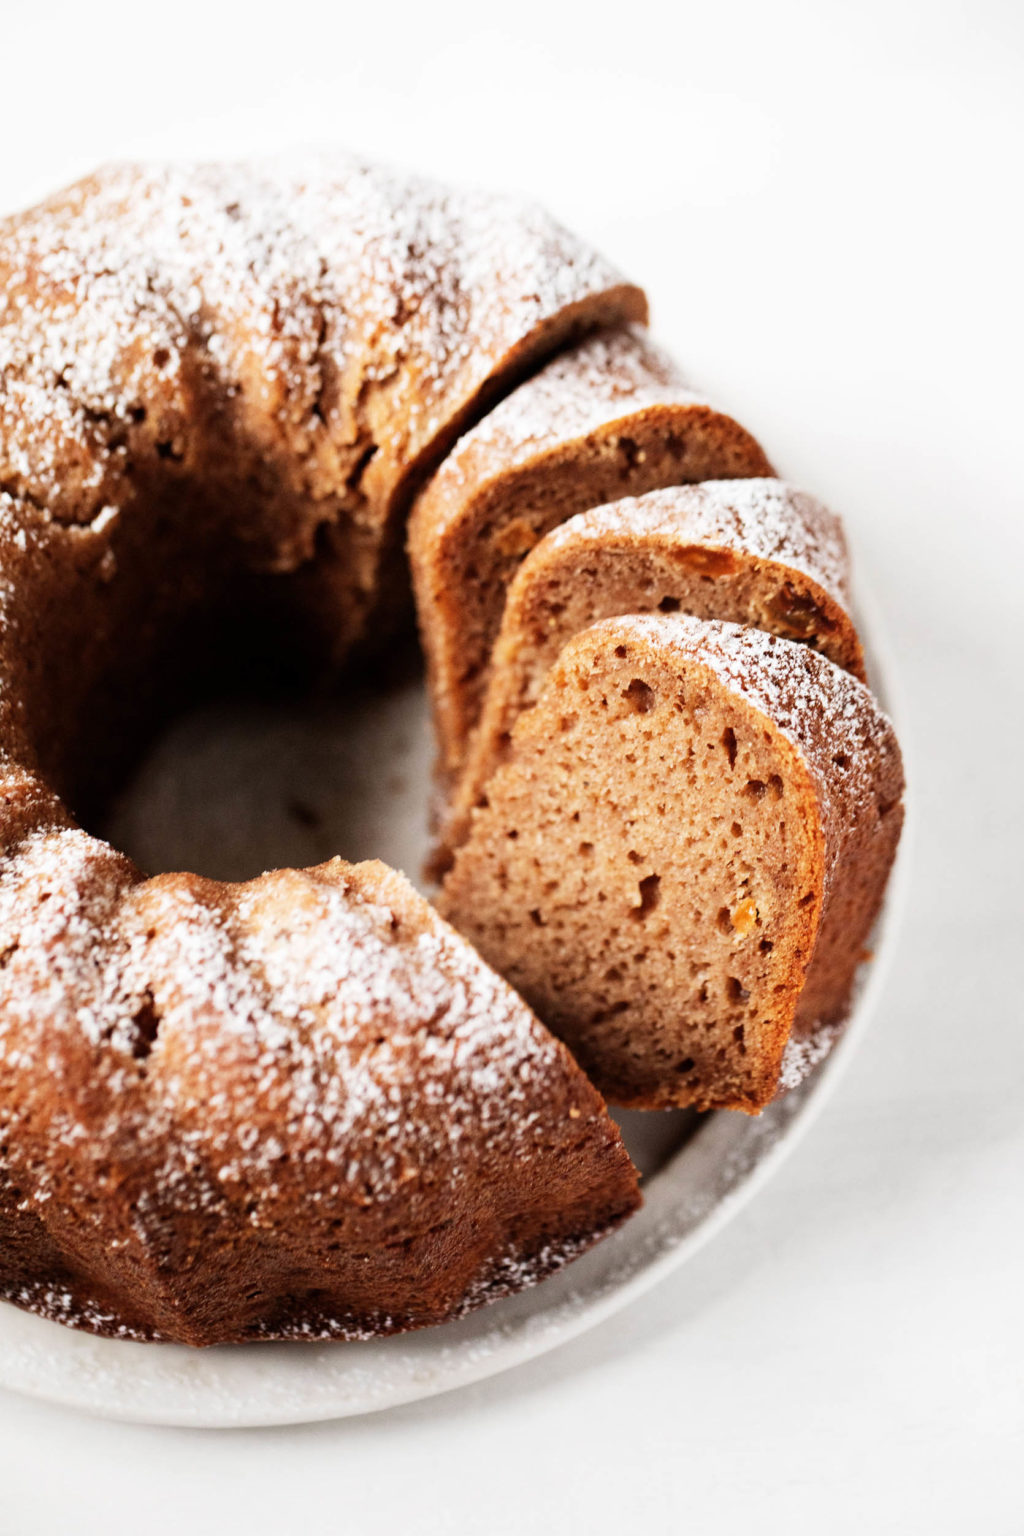 An applesauce spiced bundt cake has just been sliced into pieces for serving.